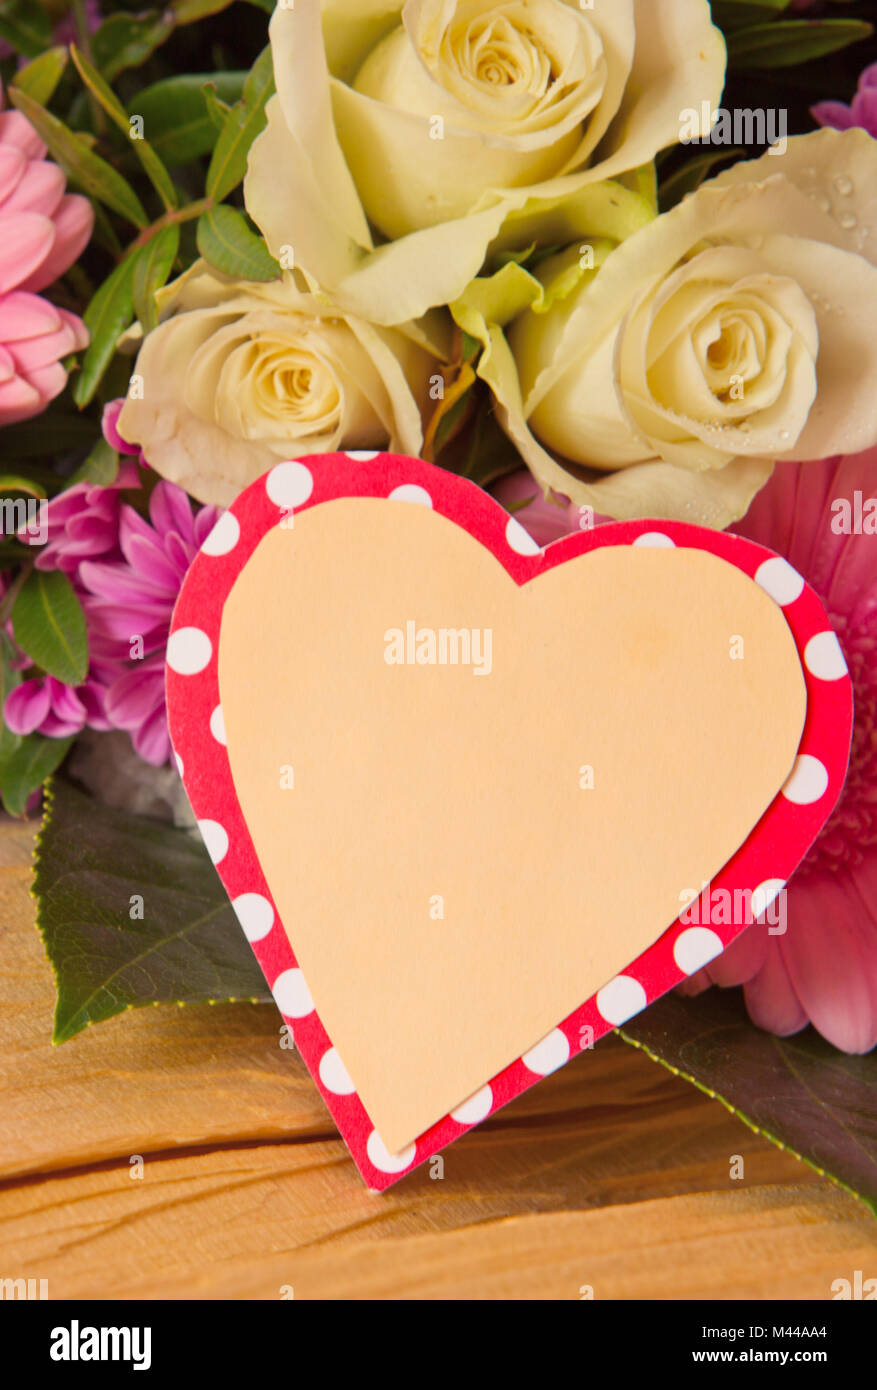 Colorful flowers bouquet  and heart shaped card. Stock Photo